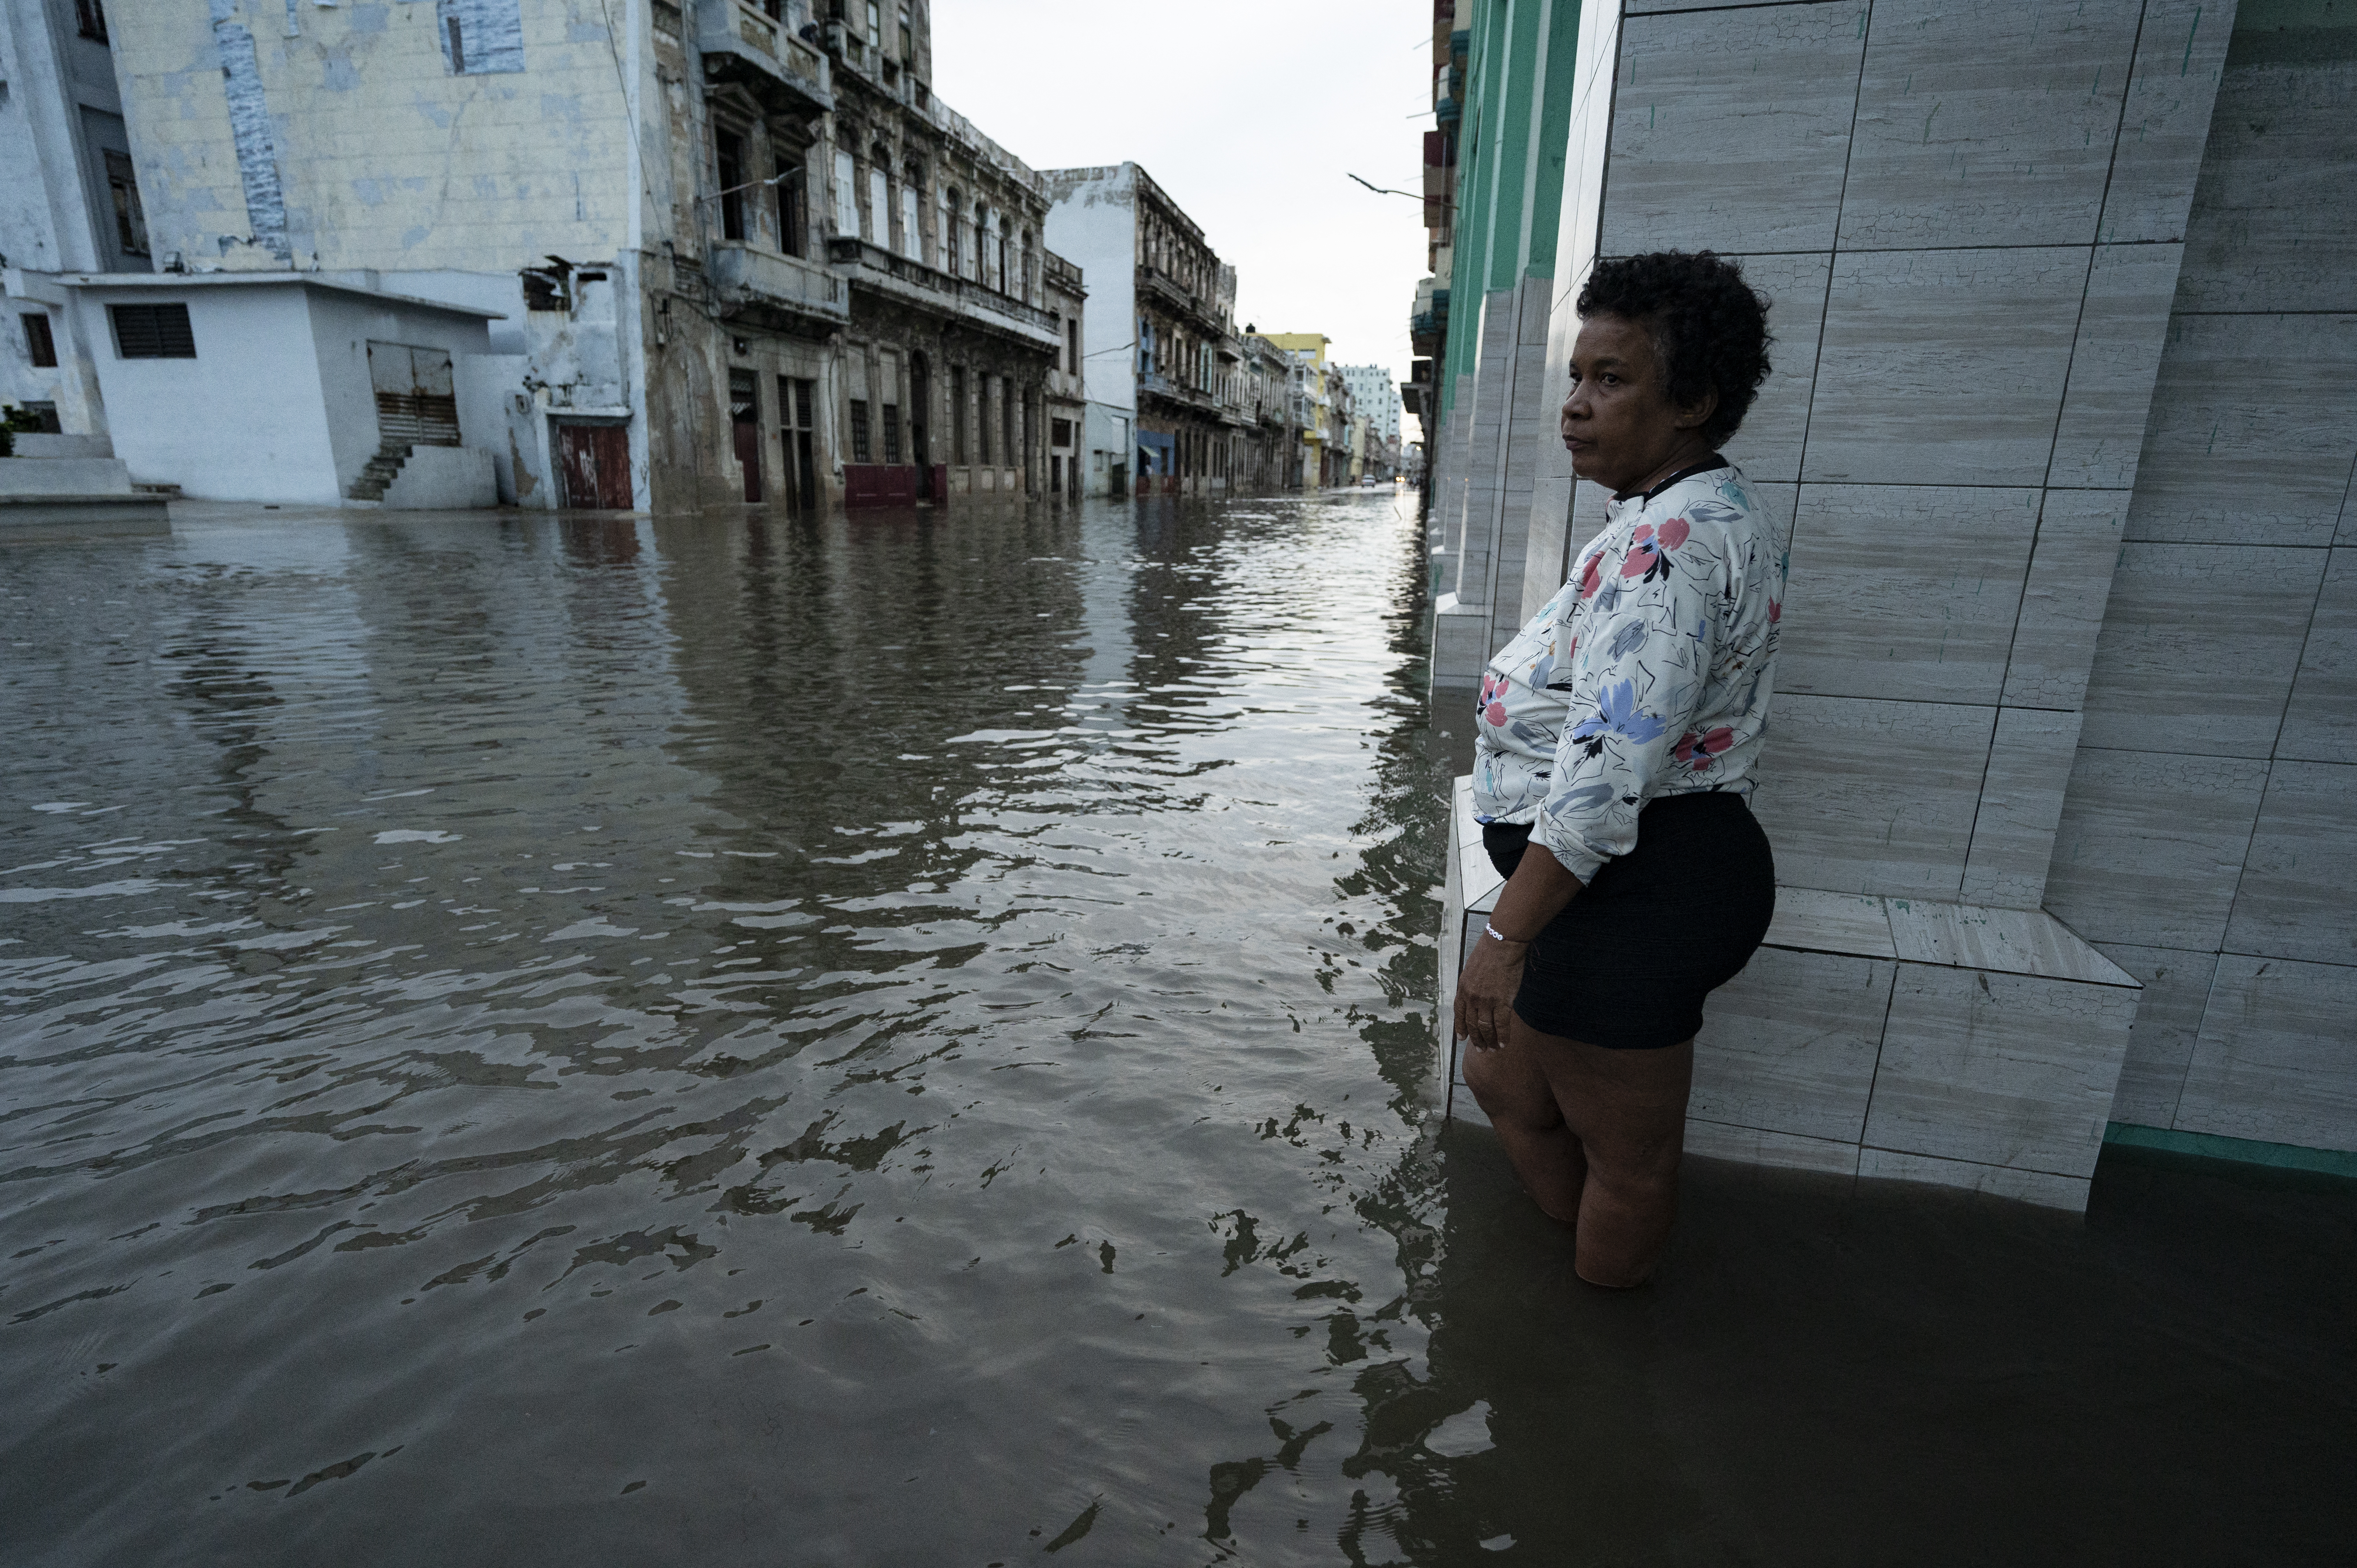 A woman stands on a flooded street in Havana, on September 28, 2022, after the passage of hurricane Ian. - Cuba exceeded 12 hours this Wednesday in total blackout with "zero electricity generation" due to failures in the links of the national electrical system (sen), after the passage of powerful Hurricane Ian. (Photo by YAMIL LAGE / AFP)